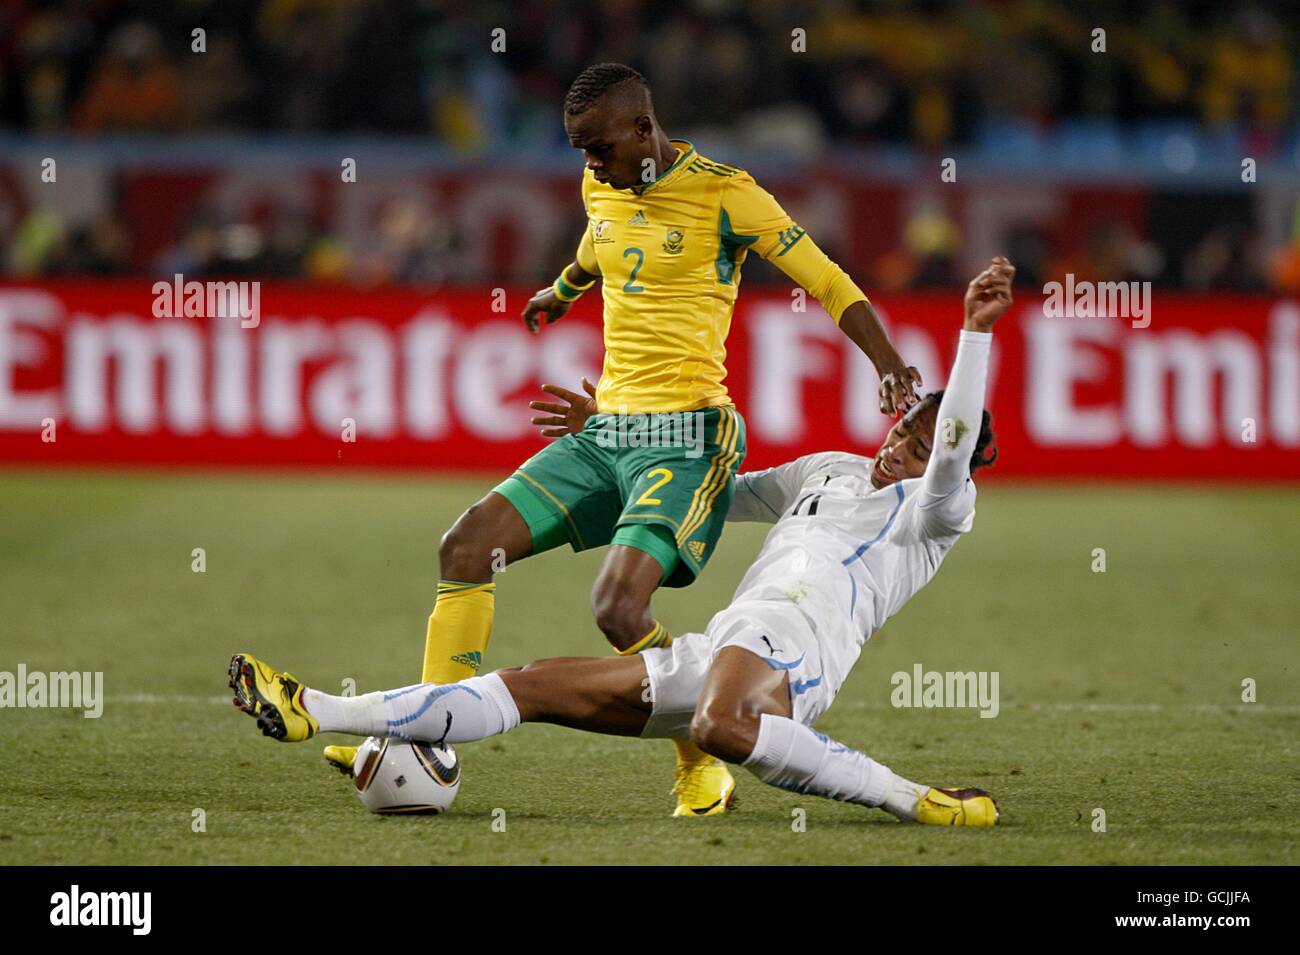 Soccer - 2010 FIFA World Cup South Africa - Group A - South Africa v Uruguay - Loftus Versfeld Stadium. South Africa's Siboniso Gaxa (left) is challenged by Uruguay's Alvaro Pereira (right) for the ball Stock Photo